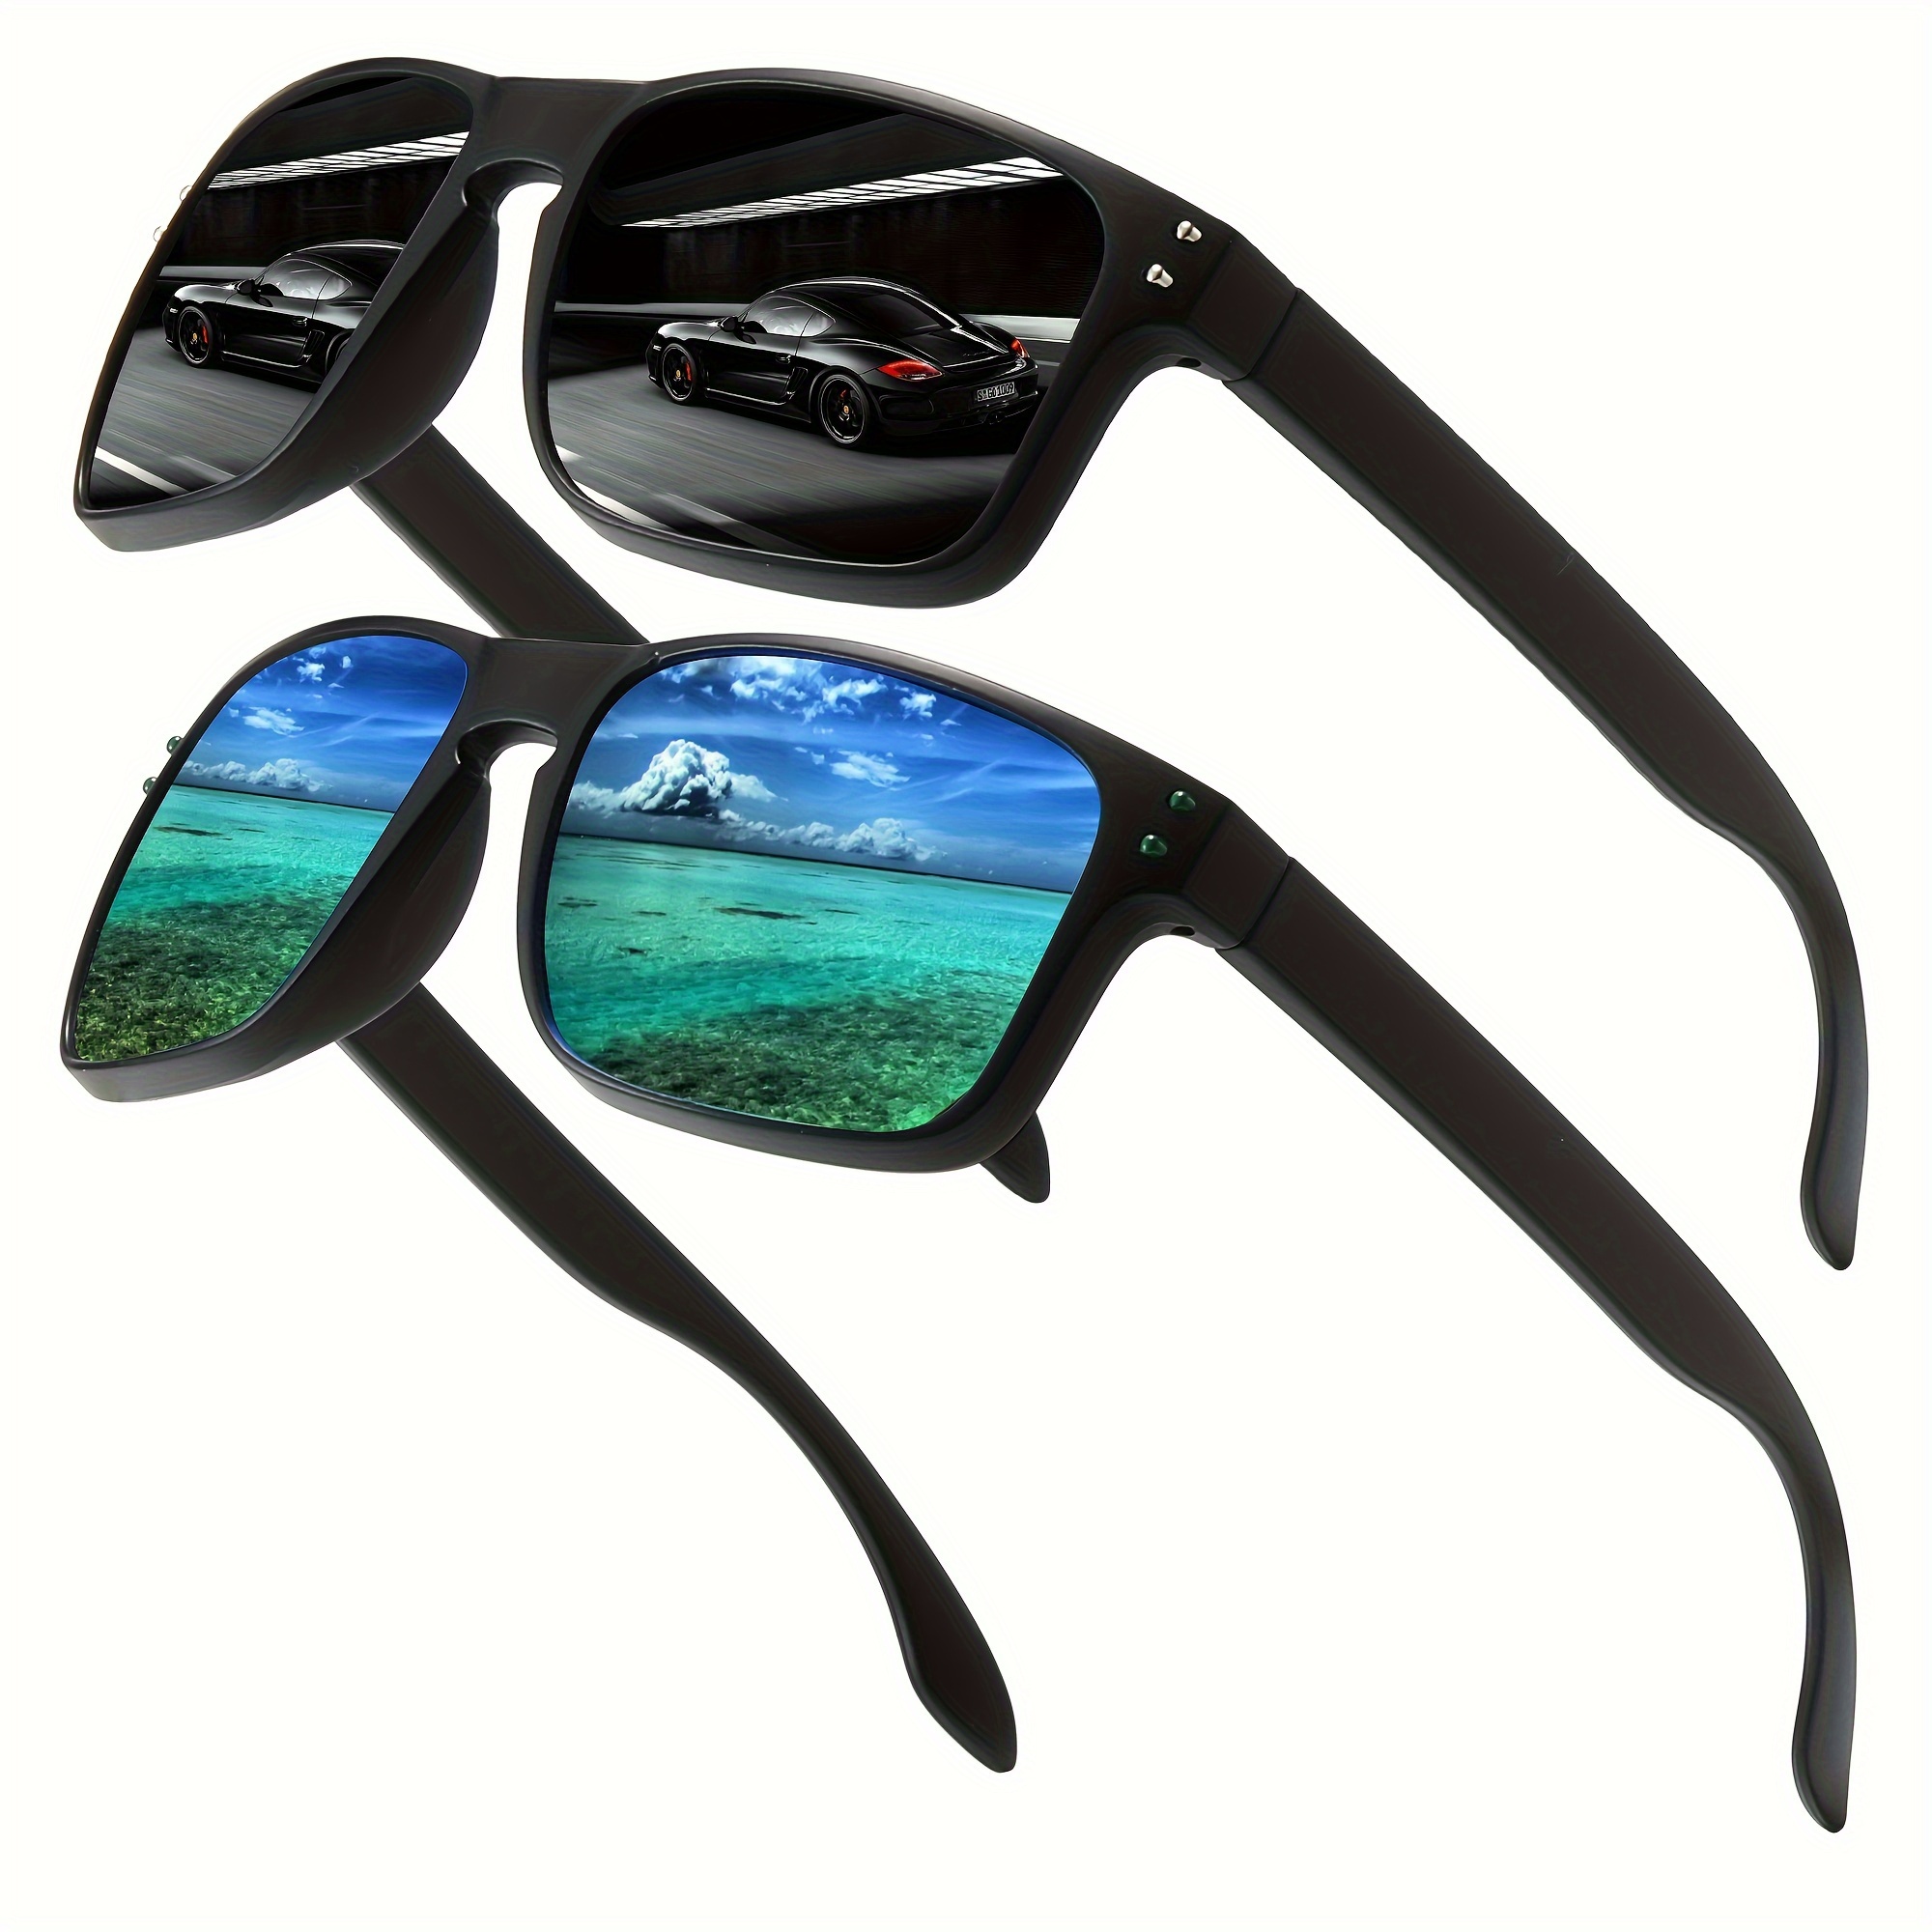 Men's Polarized Sunglasses Outdoor Sports Cycling Sunglasses Driver Driving Fishing Glasses UV400,Sun Glasses Pit Vipers,Goggles Sunglasses,Y2k,Eye